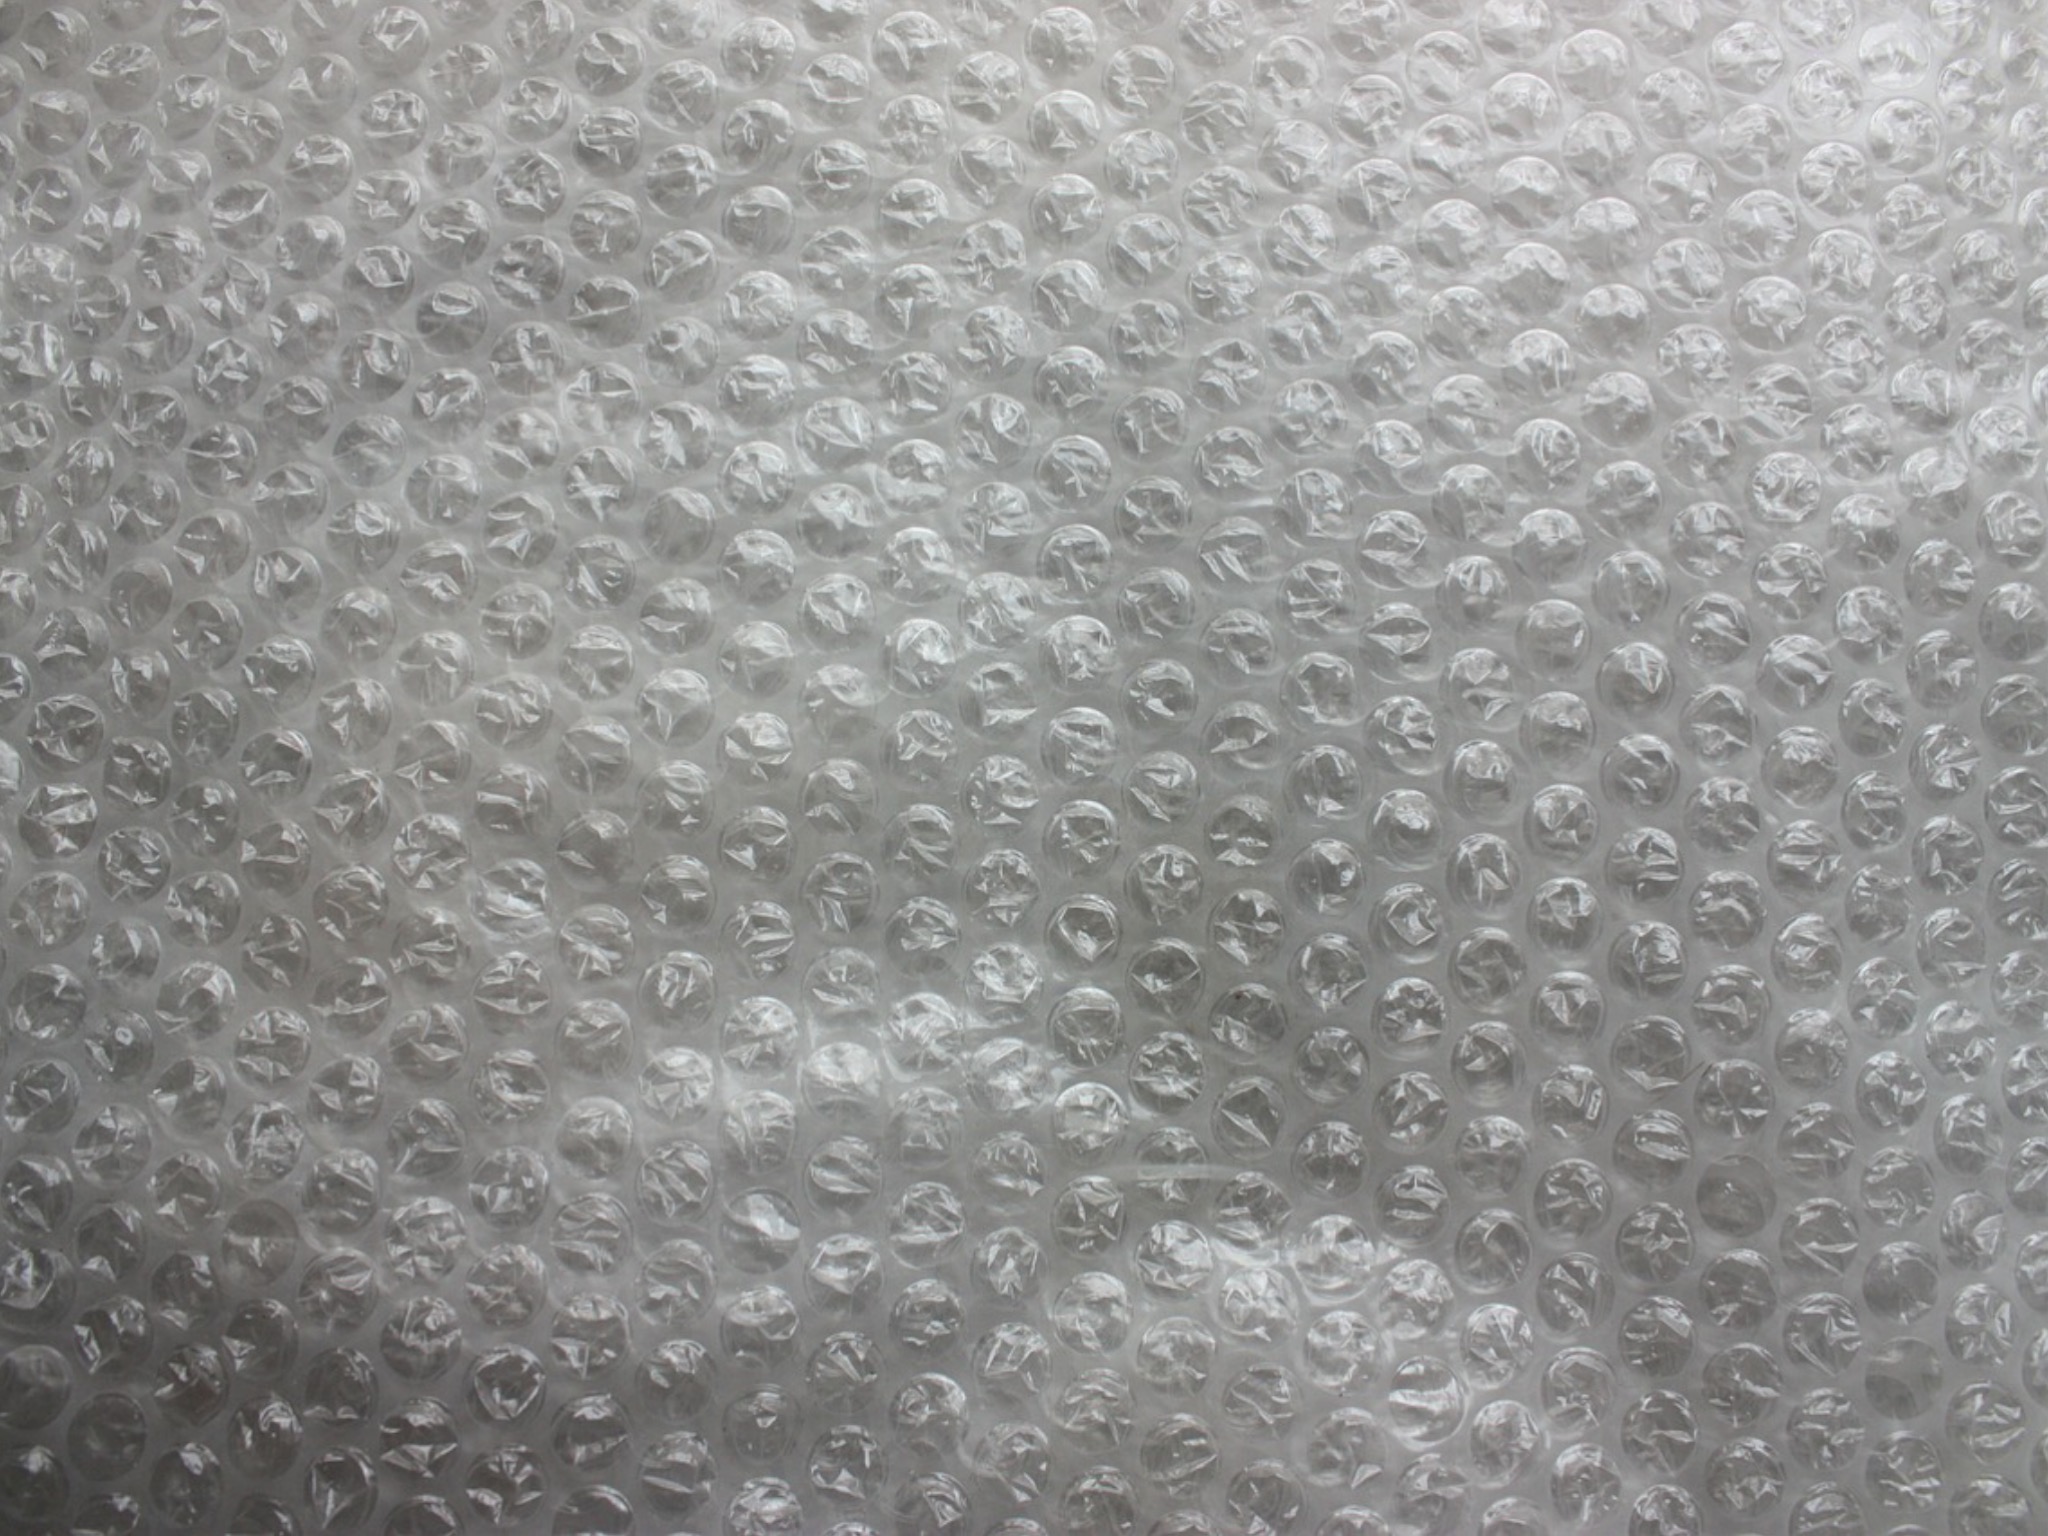 Bubble wrap is not curbside recyclable.